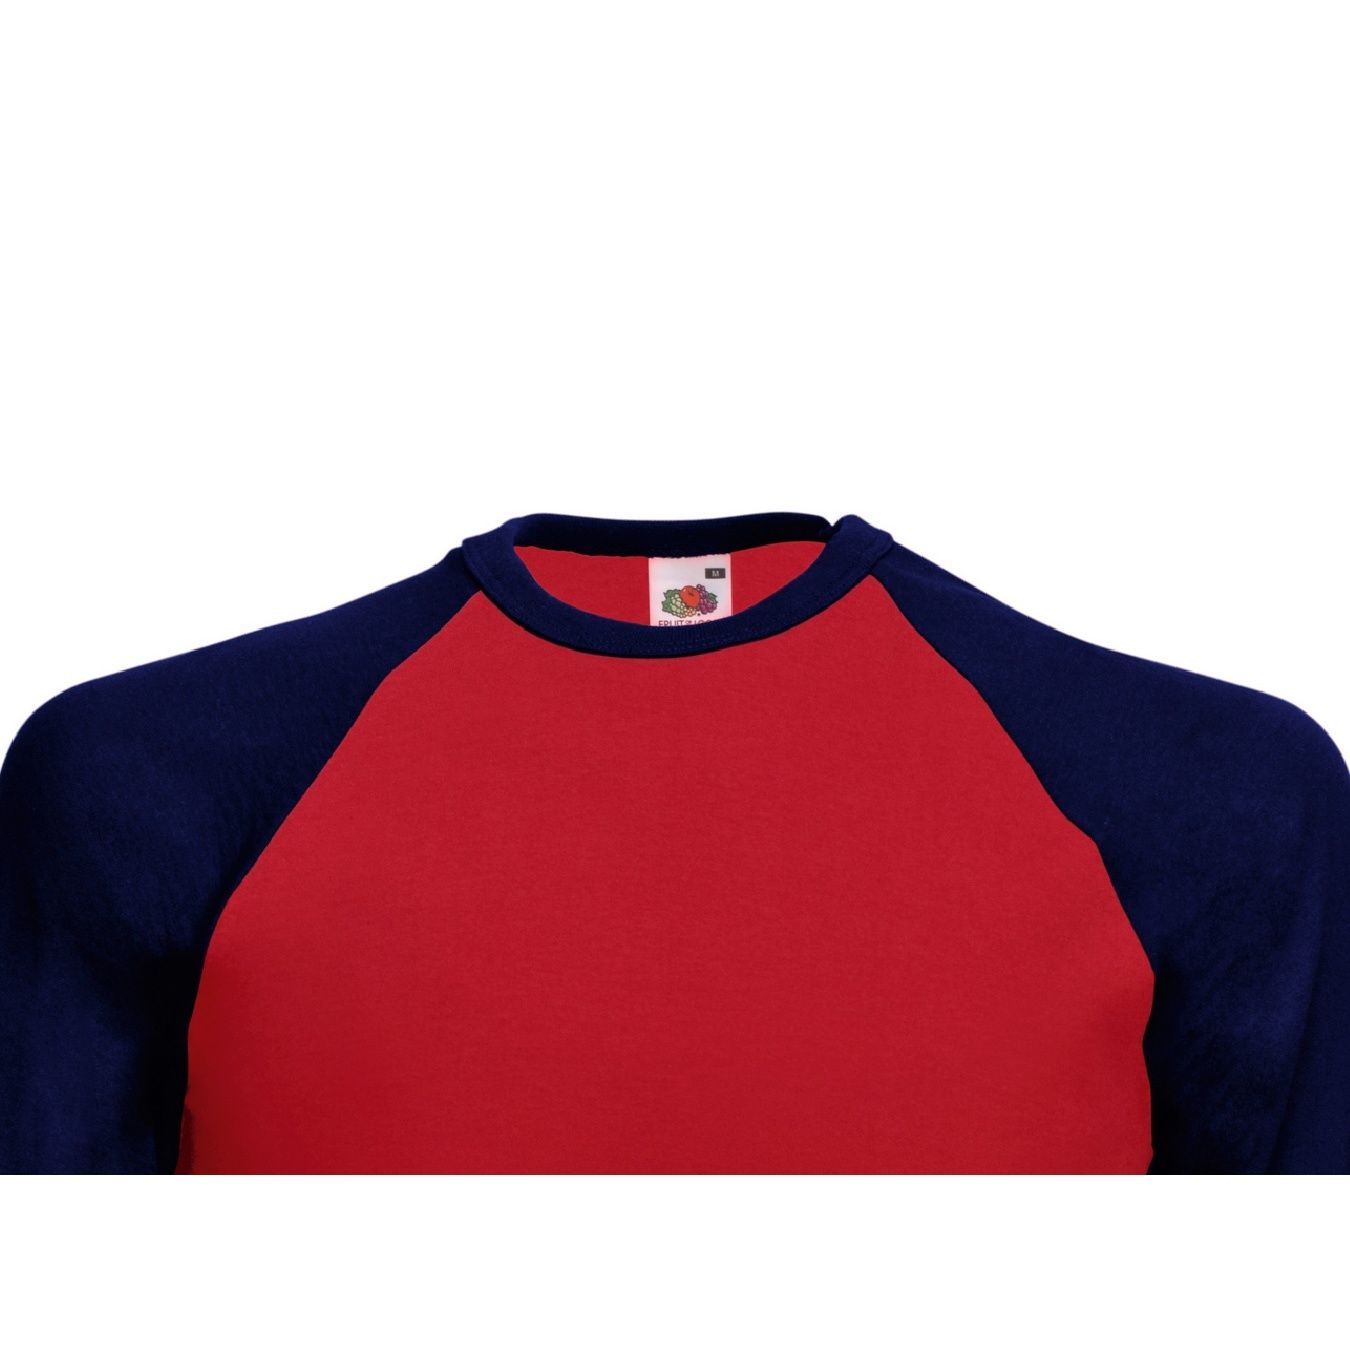 Neckline with bound 1 x 1 rib with Lycra® in contrast colour. Produced using Belcoro® yarn for a softer feel and cleaner printing process. Fine knit gauge for enhanced printability. Weight: 160-165g/m². Fabric: 100% Cotton, Belcoro® yarn. S (35-37: To Fit (ins)). M (38-40: To Fit (ins)). L (41-43: To Fit (ins)). XL (44-46: To Fit (ins)). 2XL (47-49: To Fit (ins)). <BR><BR>FRUIT OF THE LOOM - a brand steeped in tradition, offering a comprehensive range of garments.